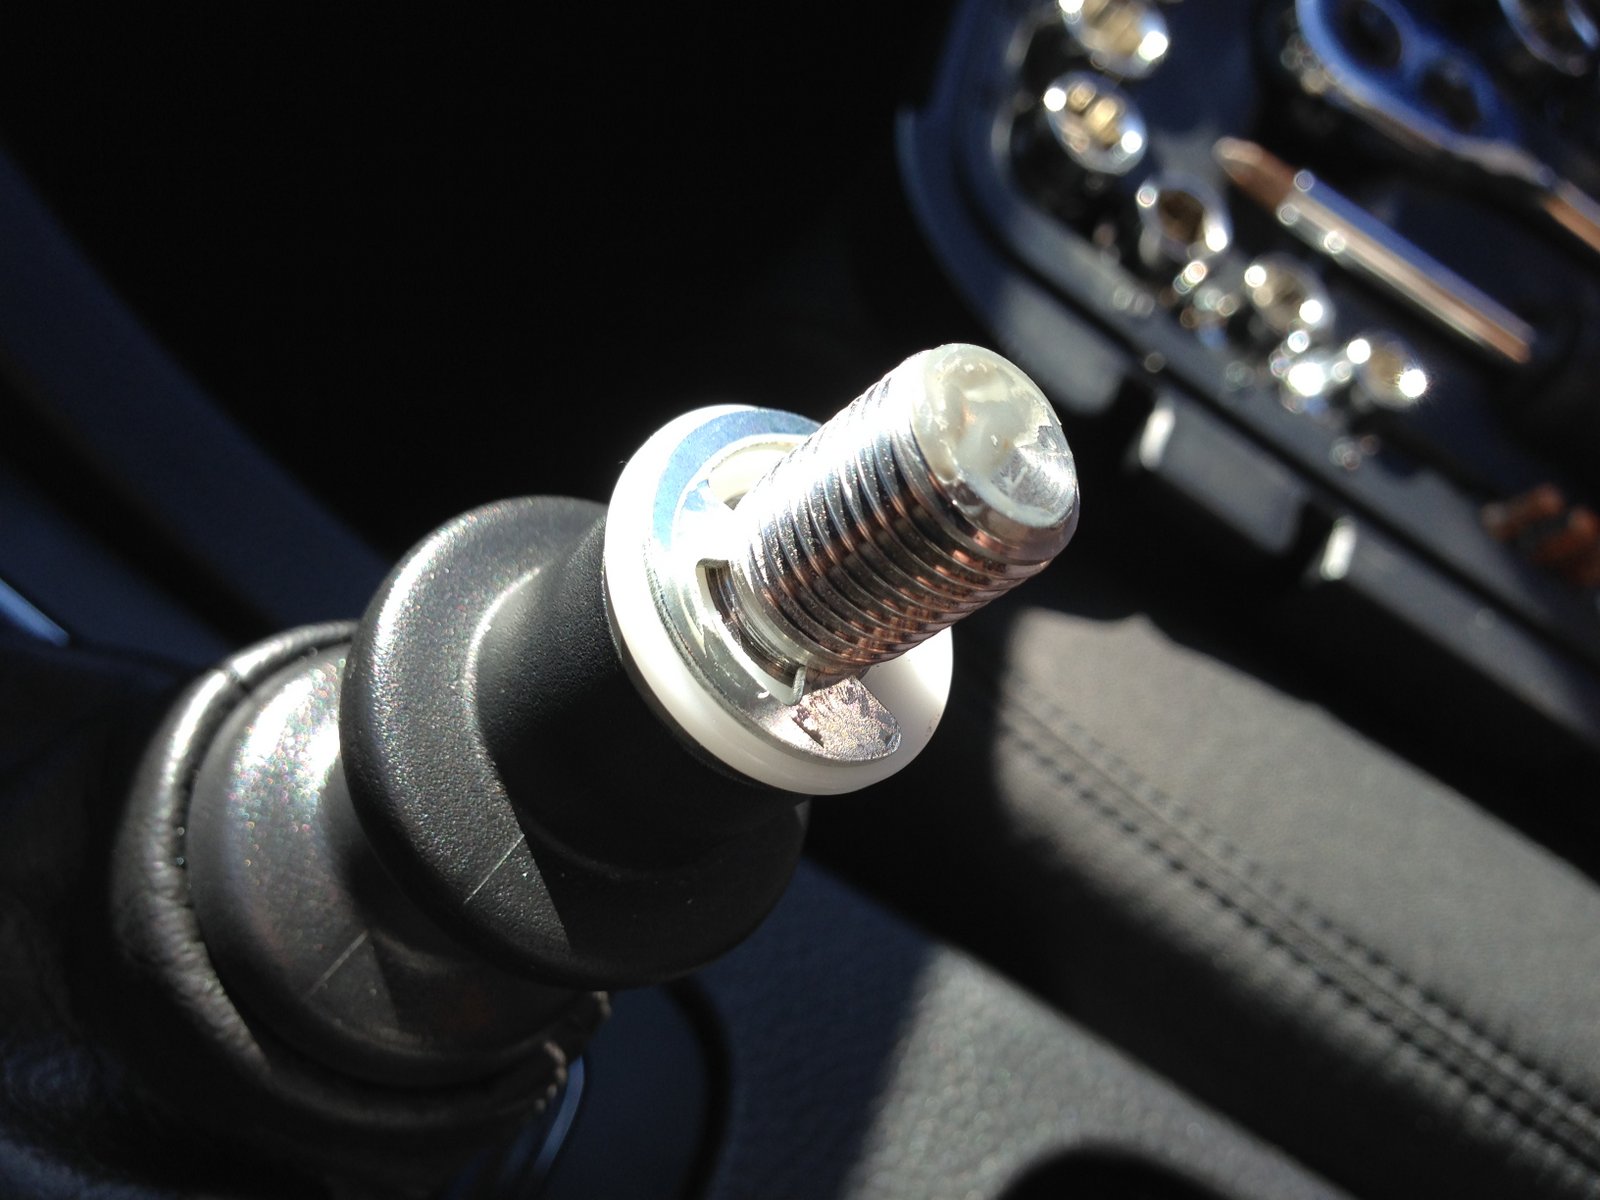 With shift knob off, carefully remove the retaining clip with a screwdriver.